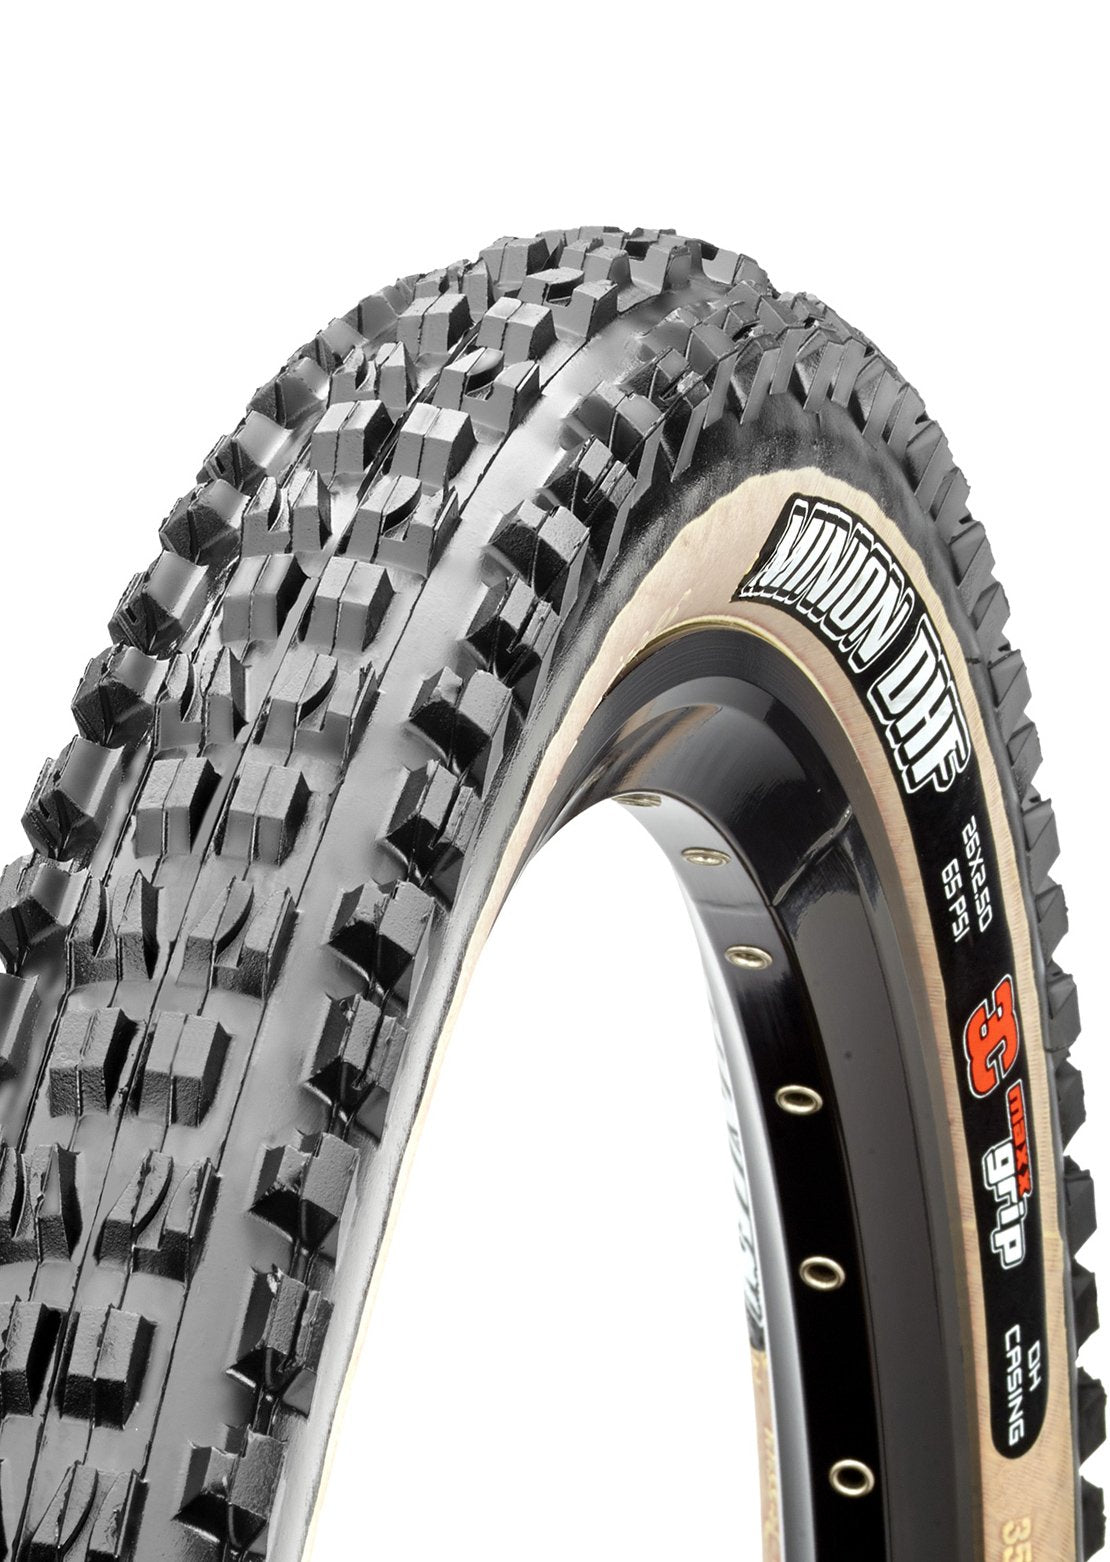 Maxxis Minion DHF DC Skinwall F60TPI Mountain Bike Tires - 29&quot; x 2.5&quot; Black